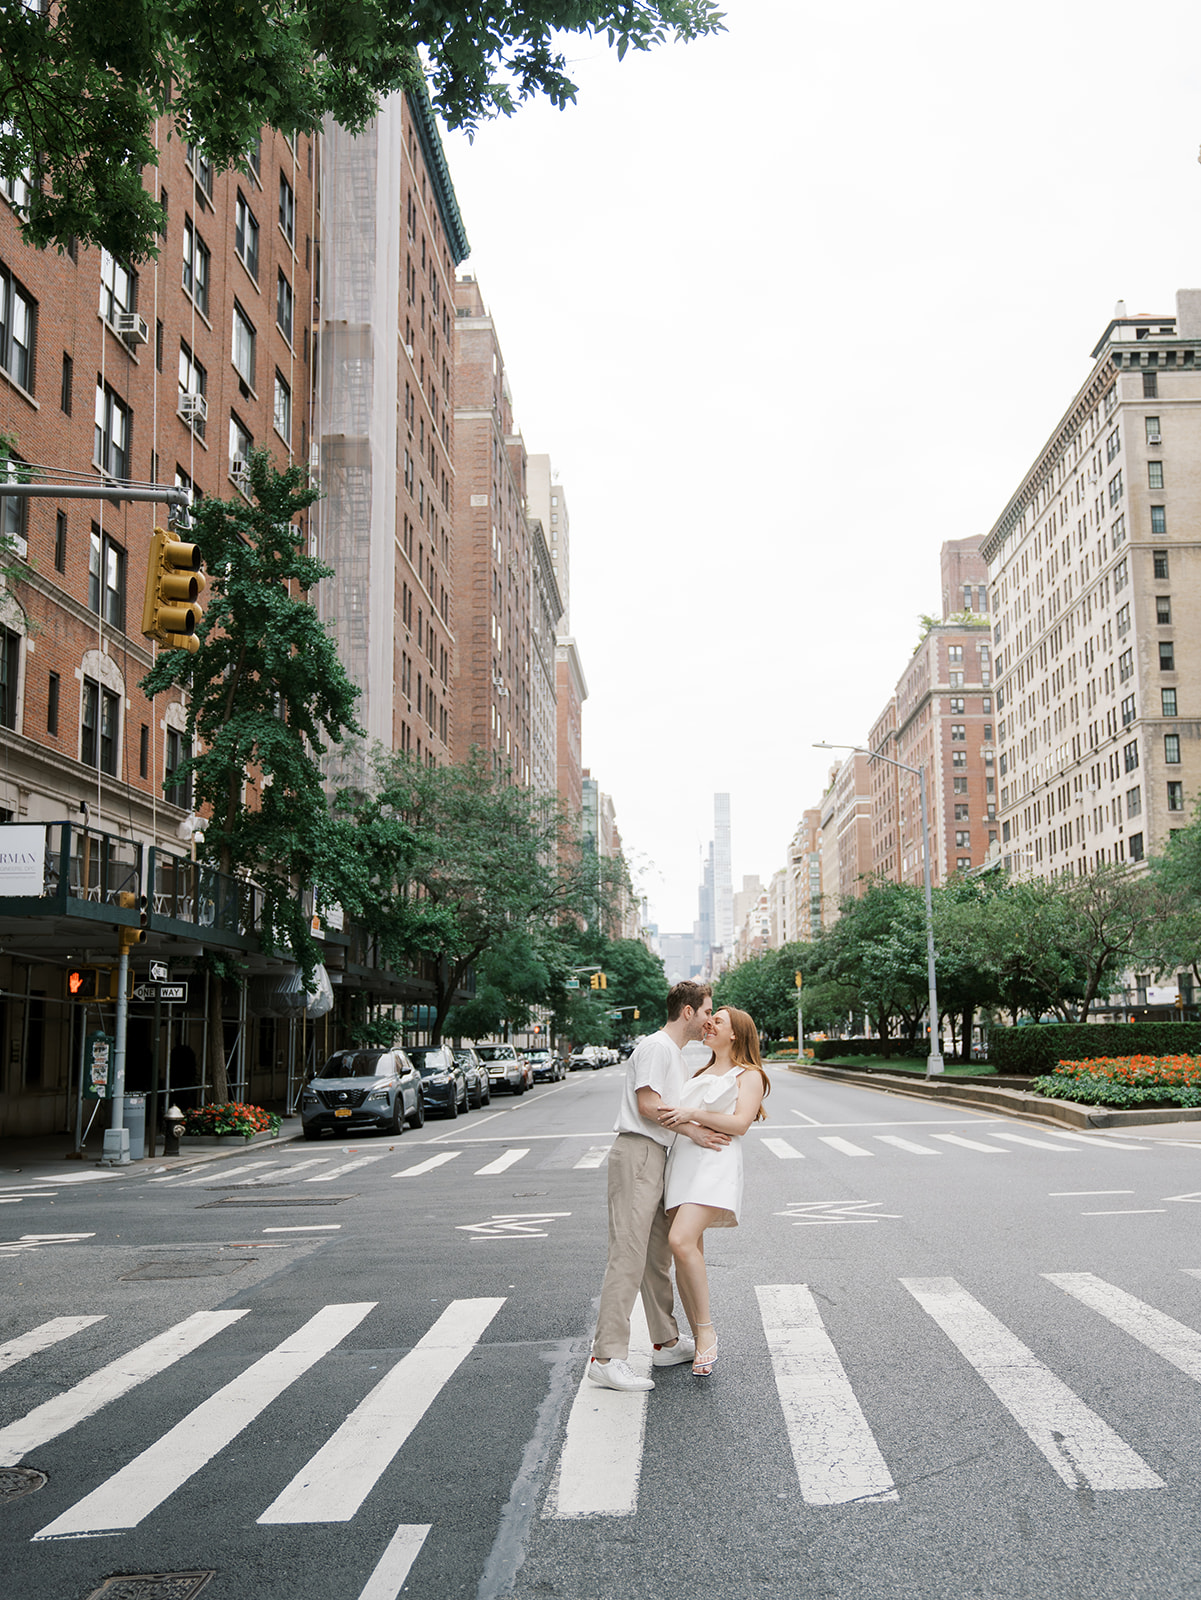 sharing a kiss in the street during their upper east side engagement shoot